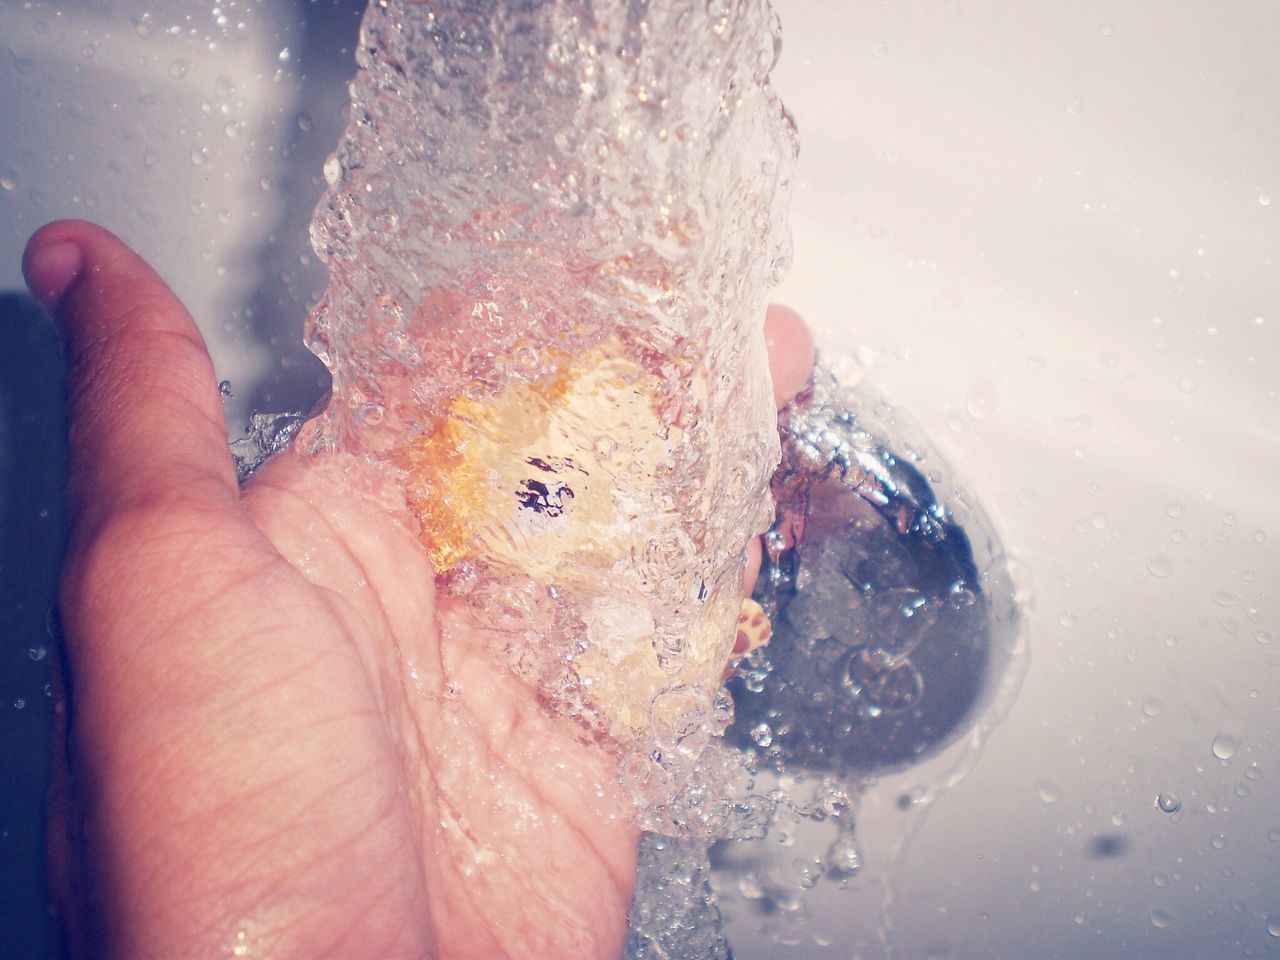 person, part of, water, holding, wet, human finger, lifestyles, unrecognizable person, personal perspective, cropped, close-up, drop, leisure activity, low section, transparent